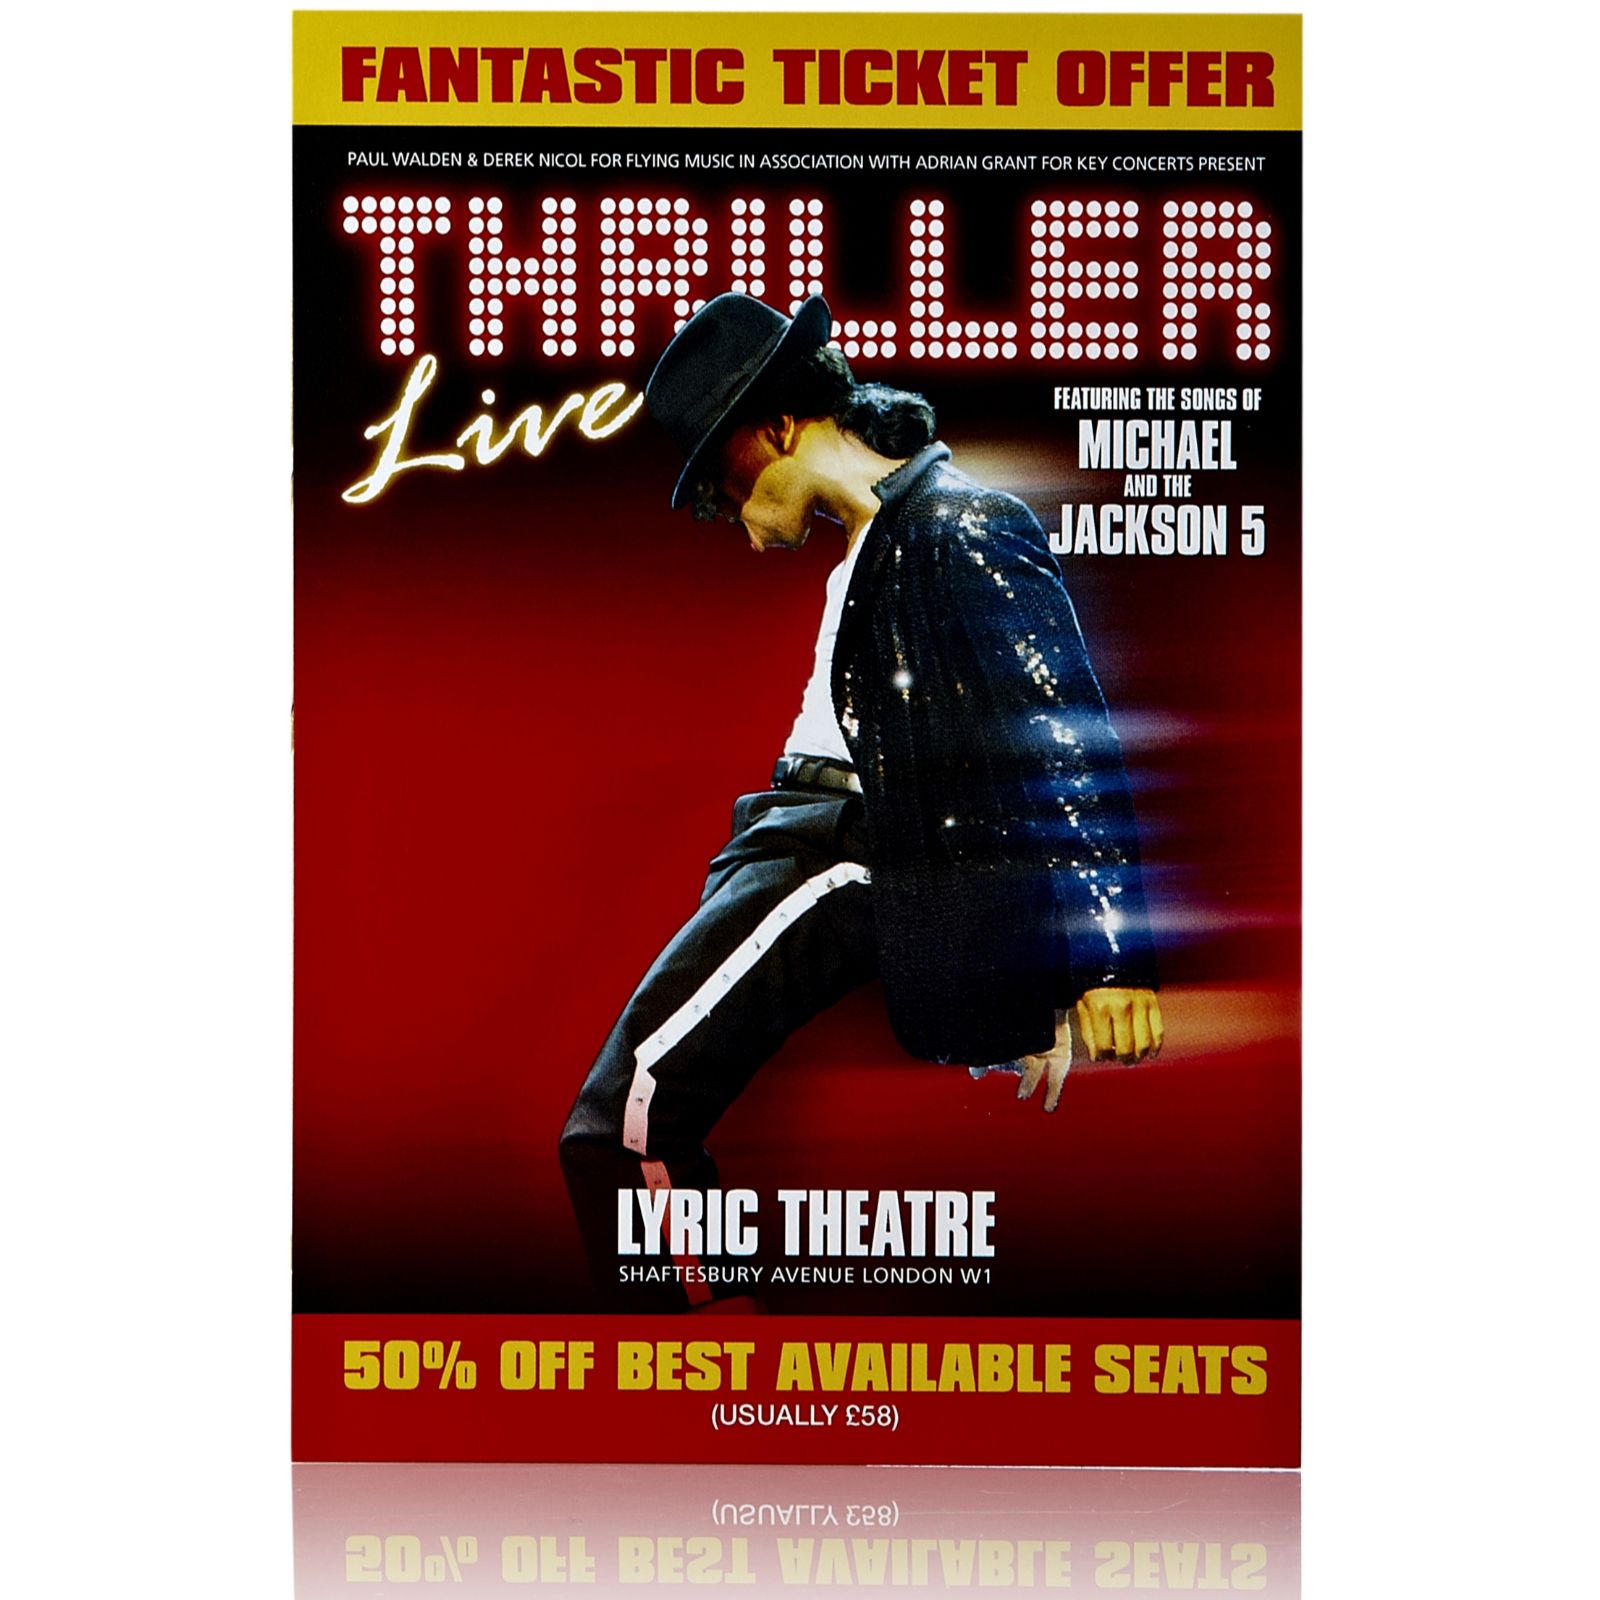 Michael Jackson The Ultimate CD/DVD Collection with 50% off Thriller Show Offer